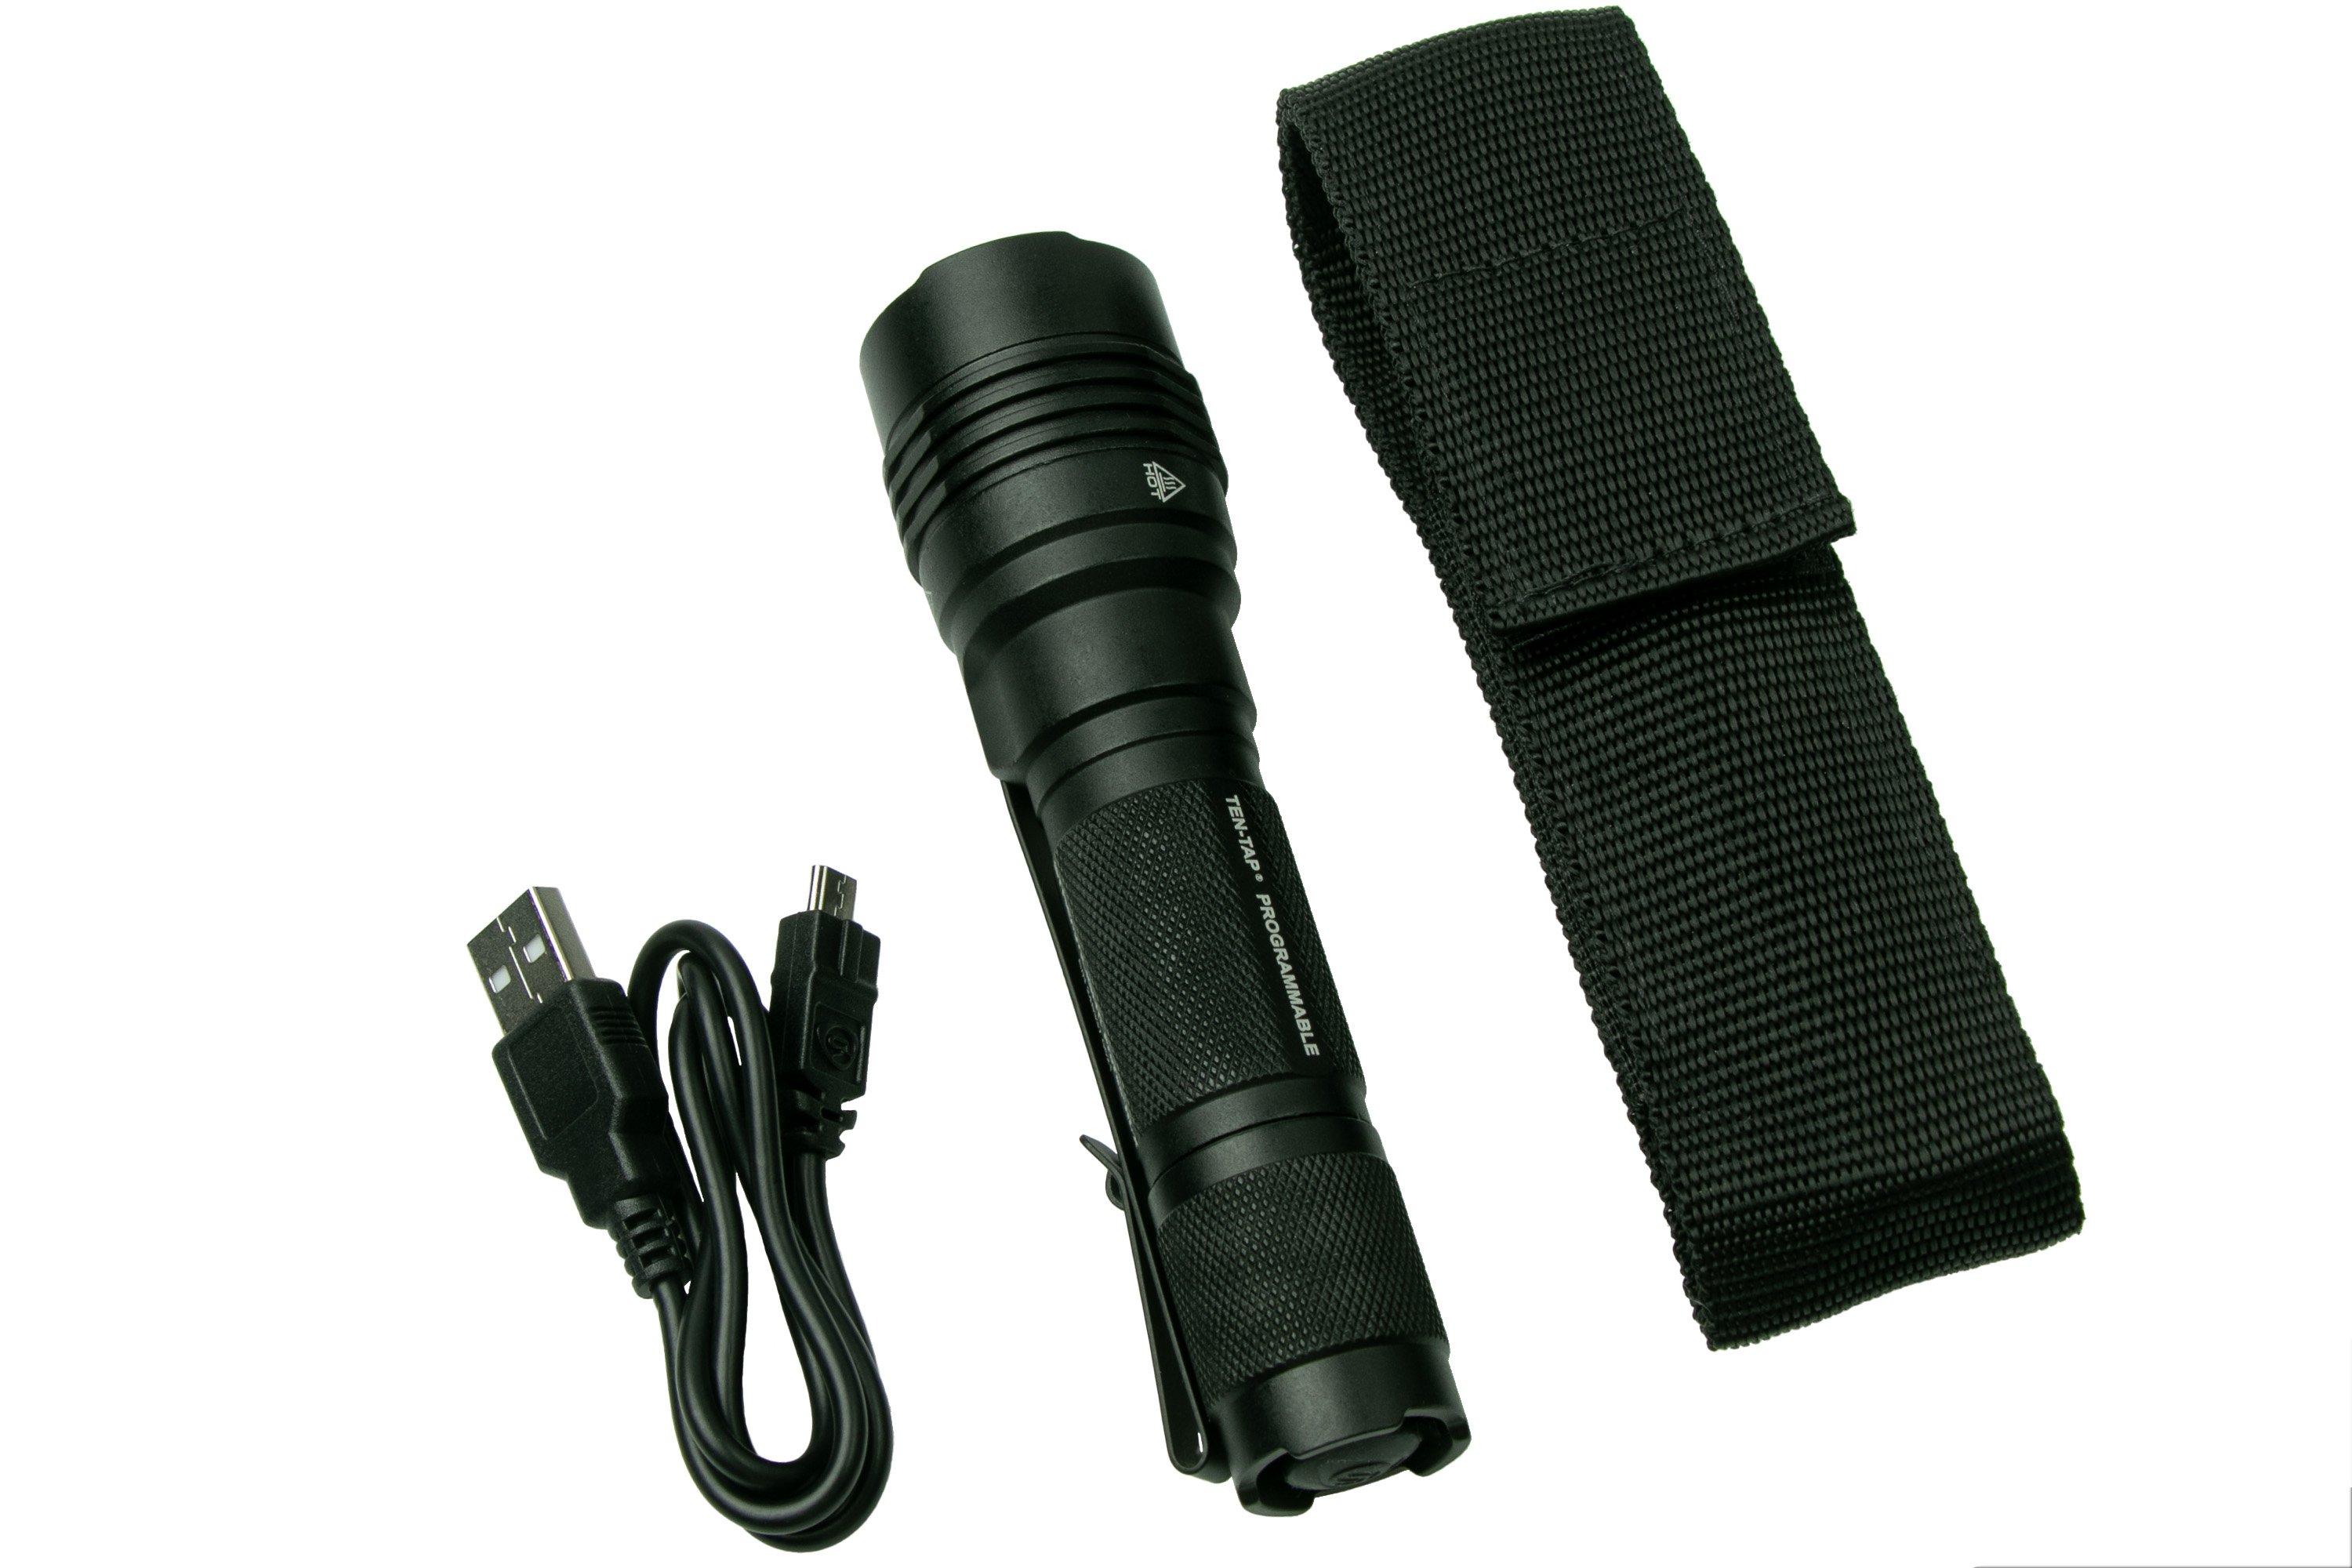 Streamlight Protac HL-X 88085 rechargeable flashlight, 1000 lumens  Advantageously shopping at